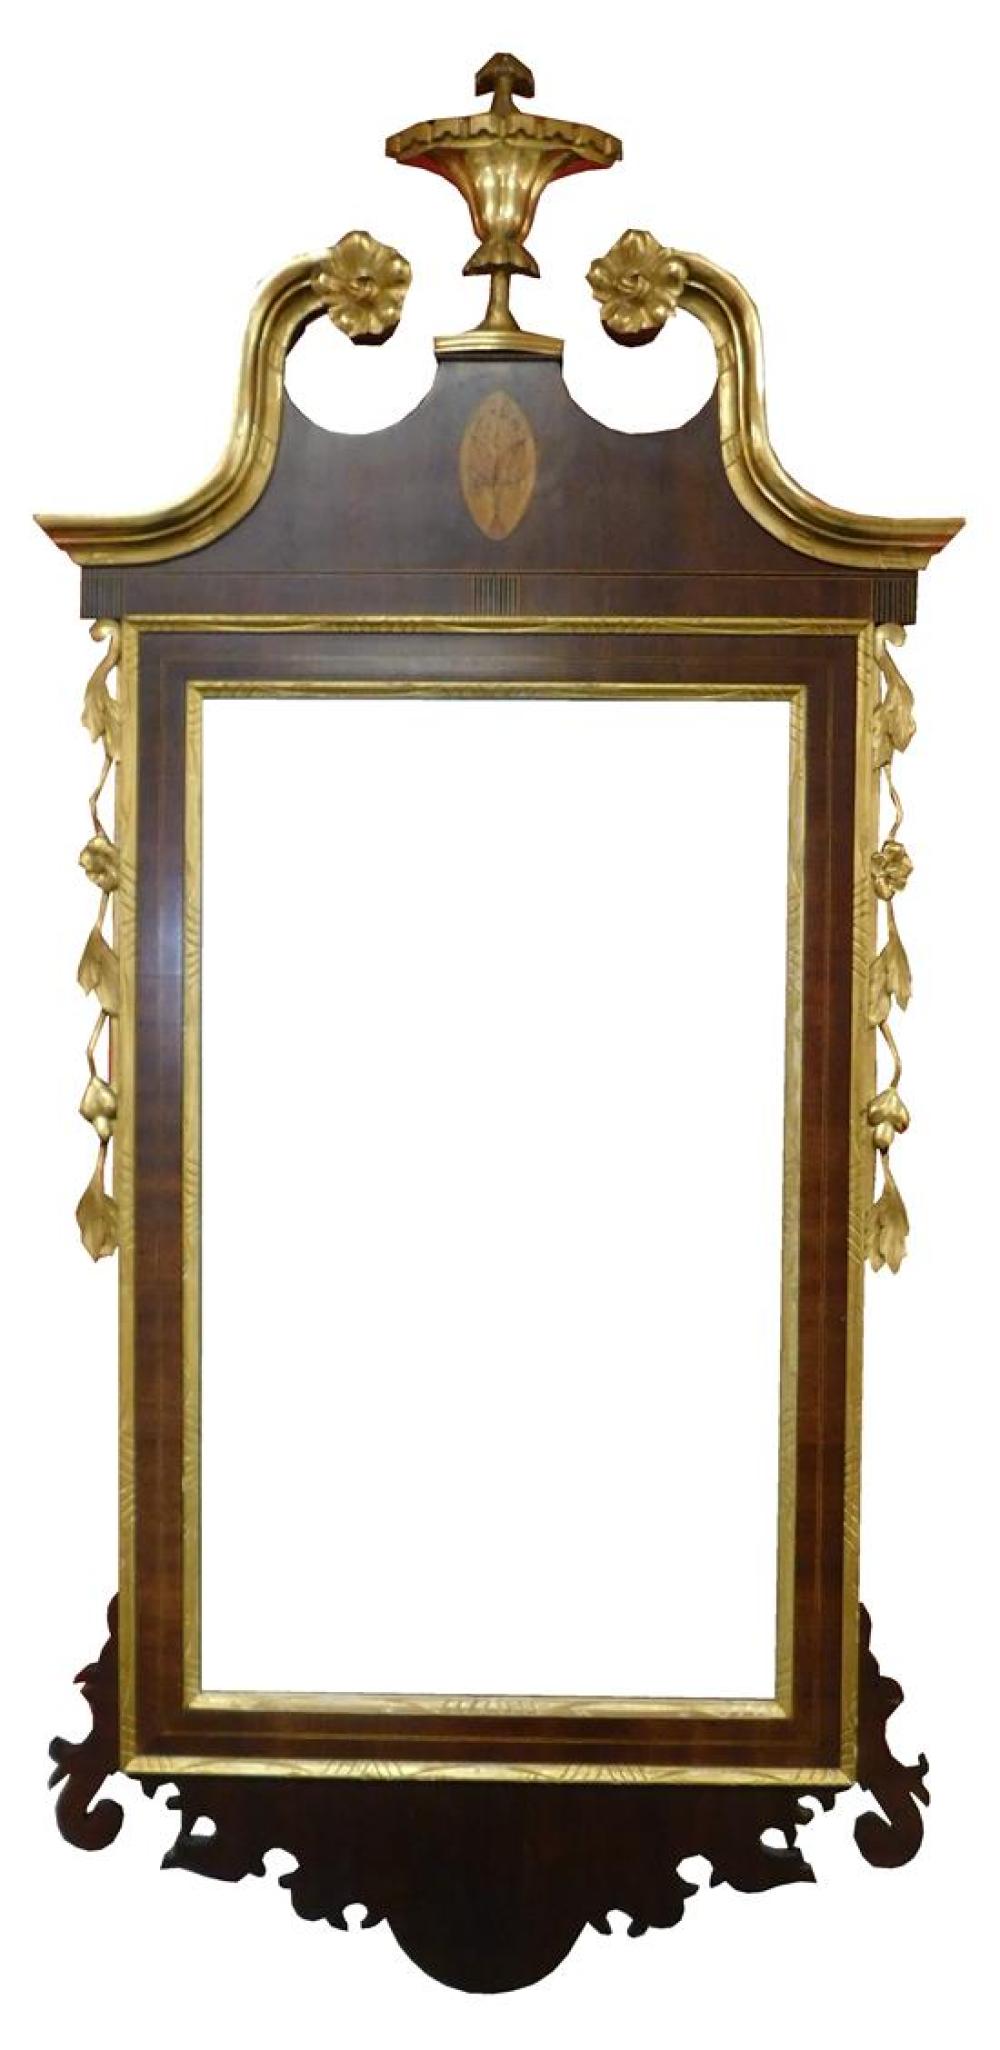 CHIPPENDALE STYLE WALL MIRROR  31cced